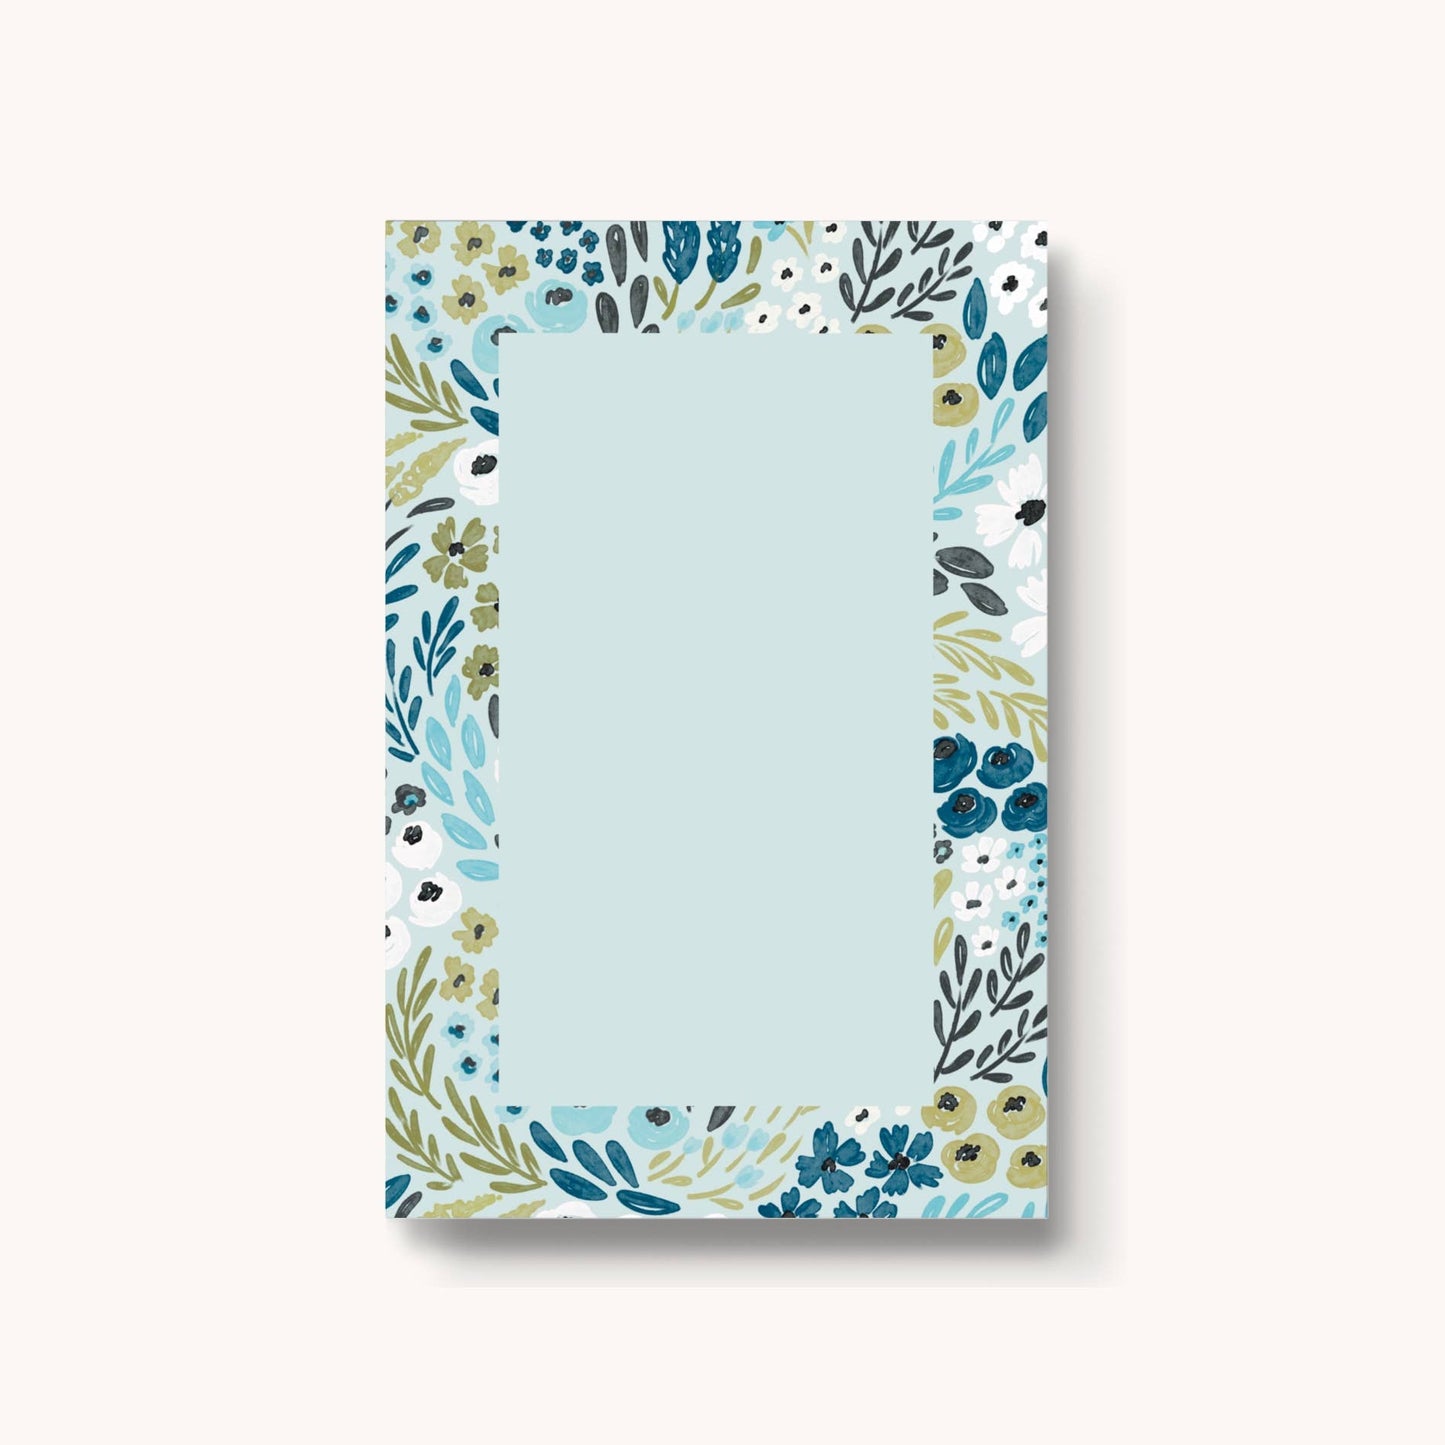 Waterfall Floral Notepad, 4x6 in.